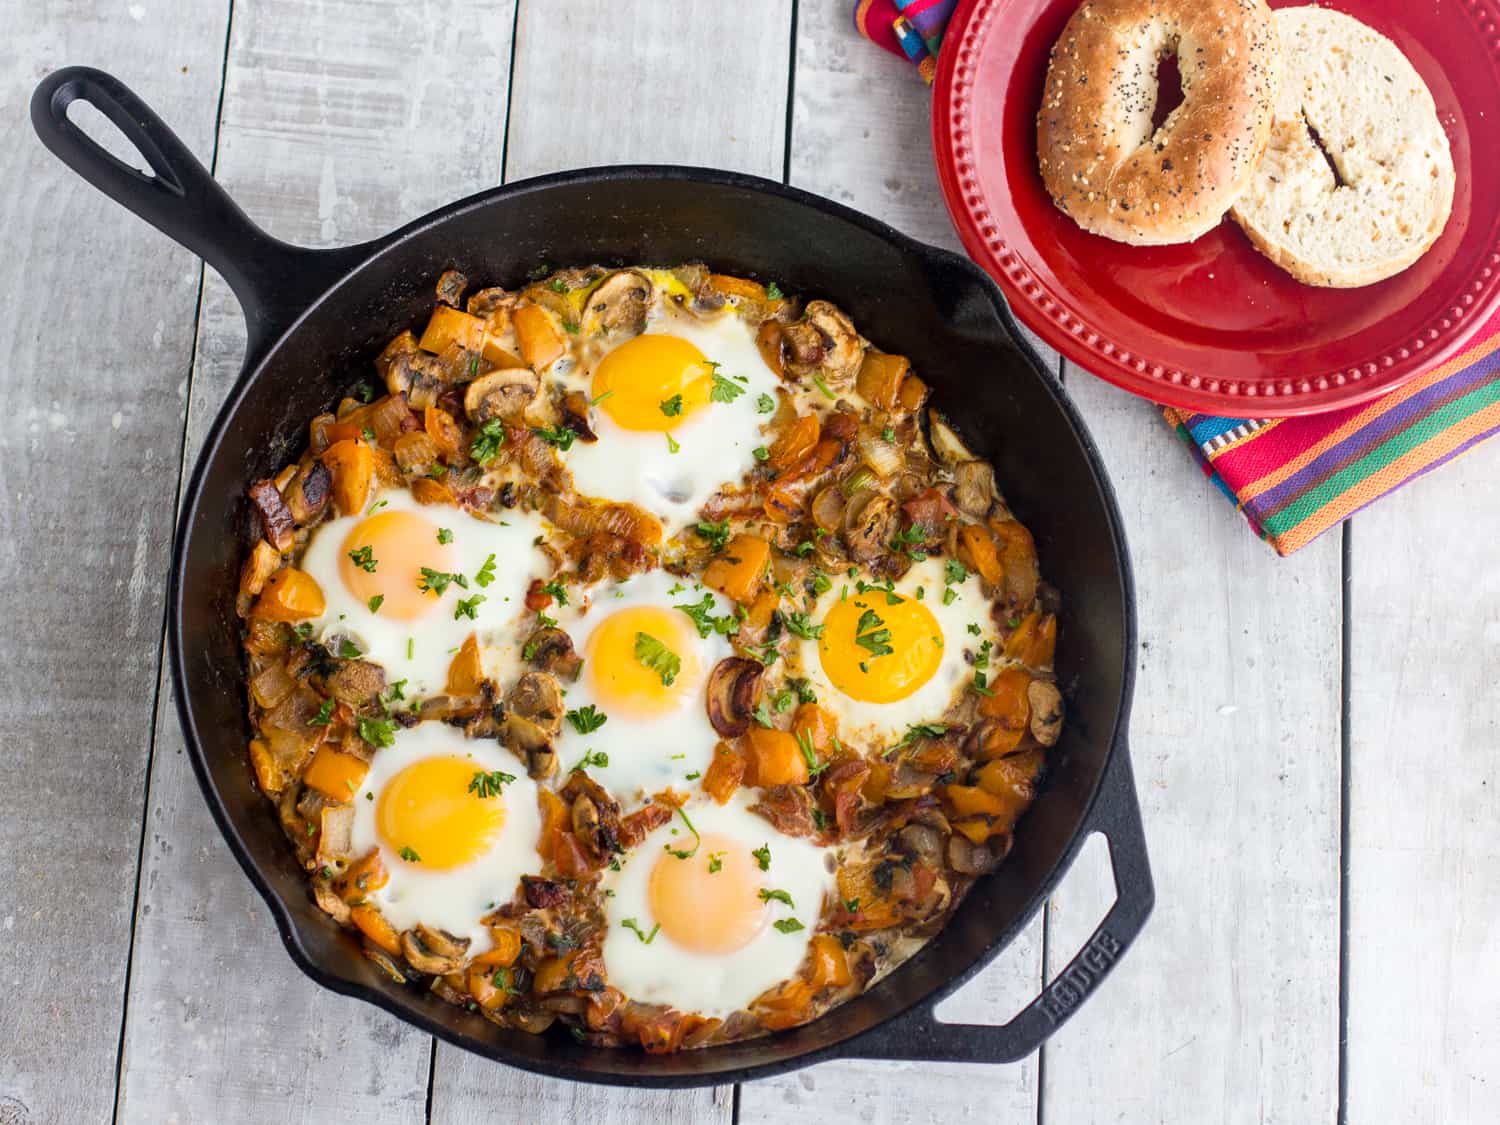 https://recipes.net/wp-content/uploads/2023/10/how-to-cook-eggs-on-cast-iron-1698459711.jpg